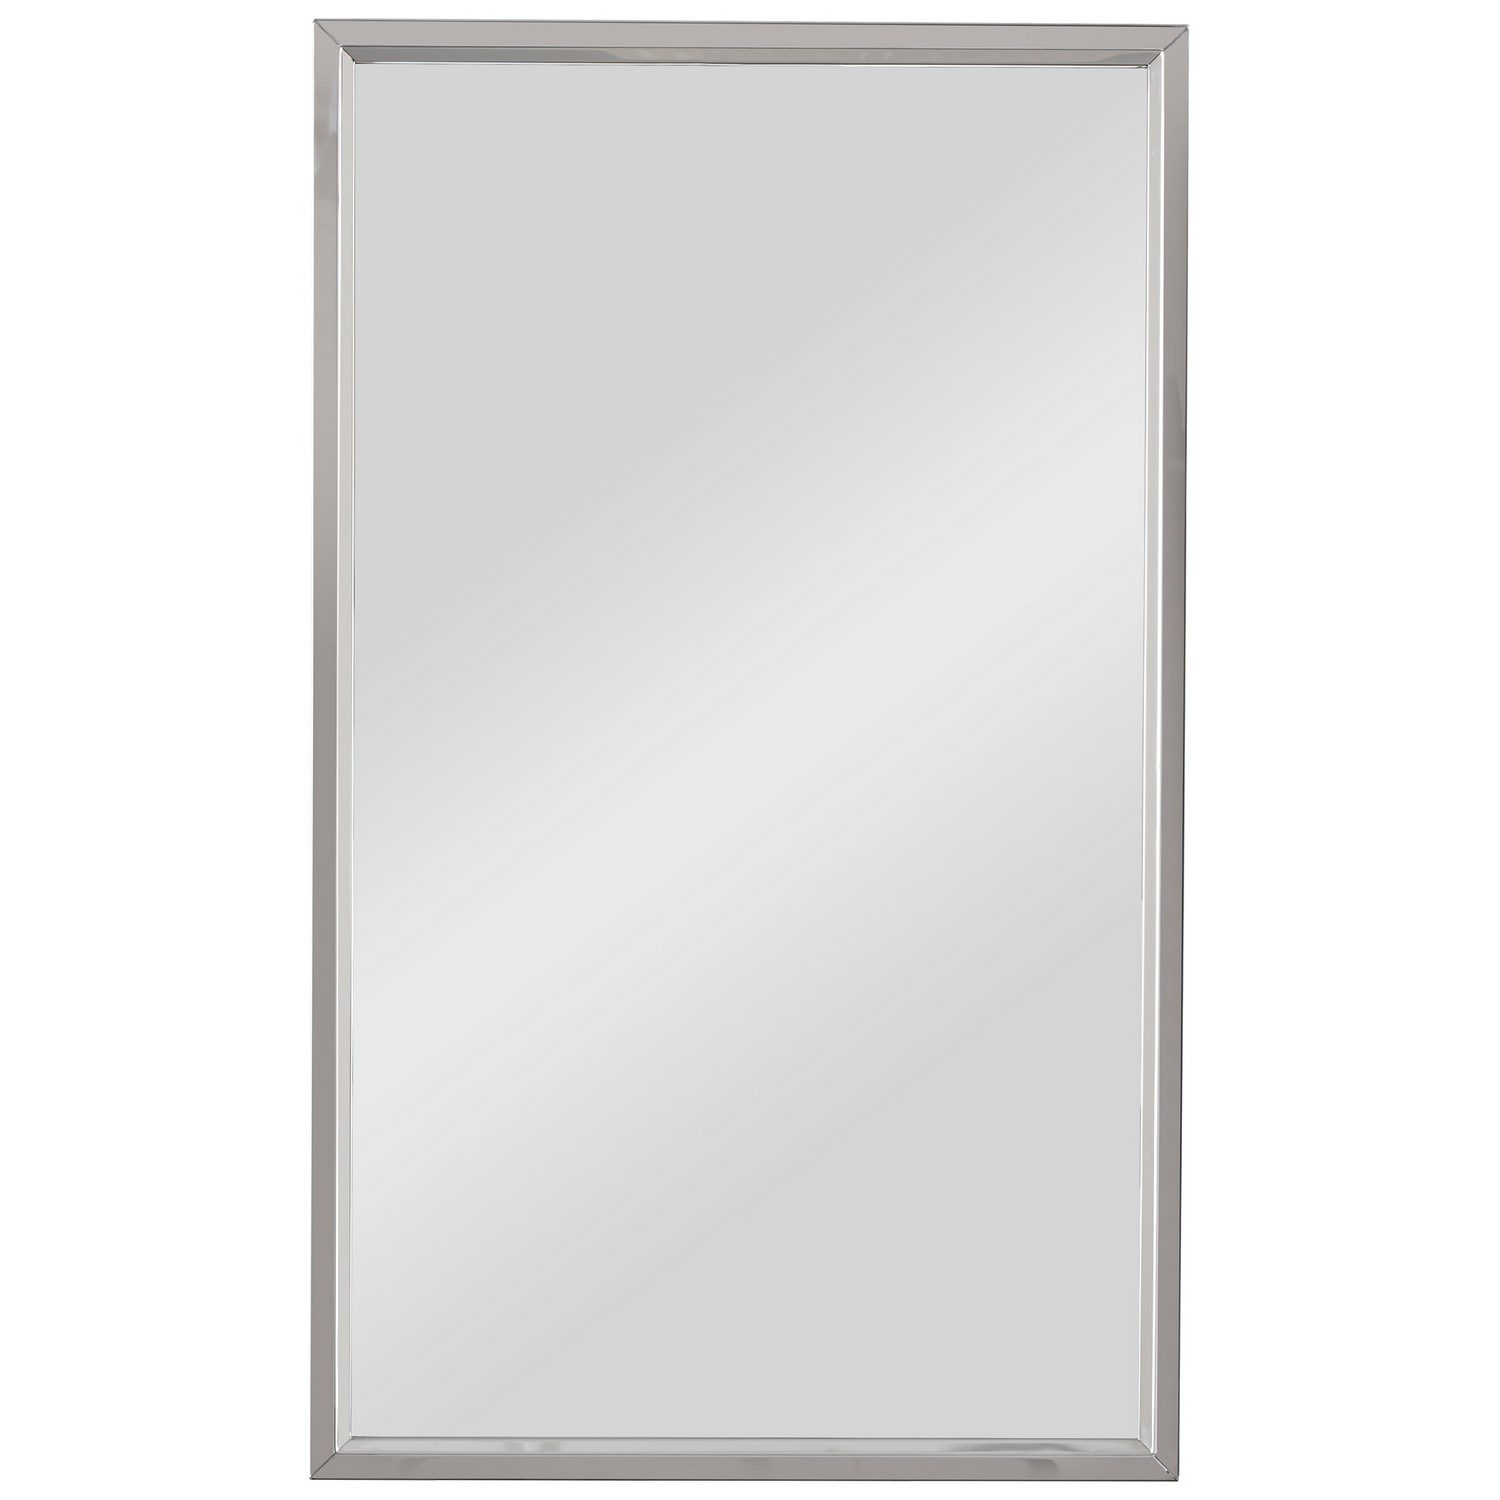 ABC Accent ABC-00493 Mirror - Stainless Steel